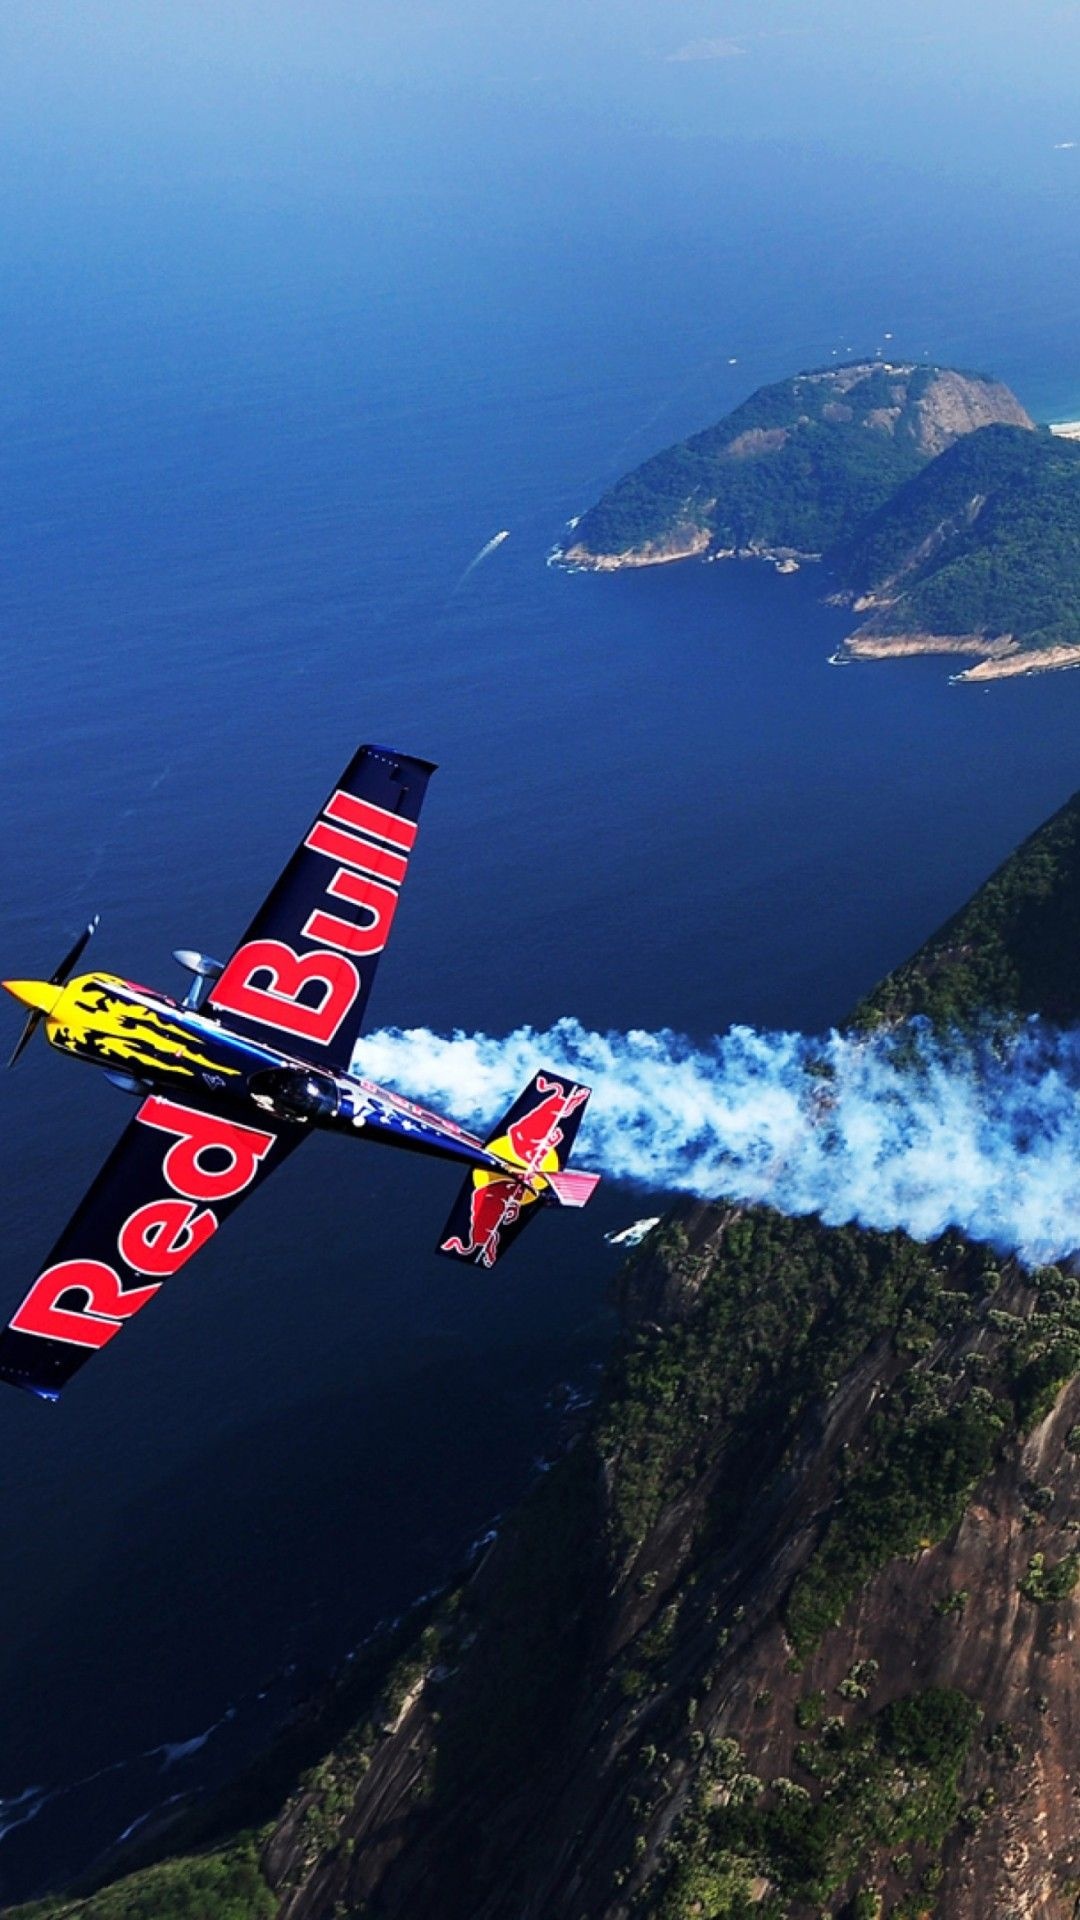 Air Racing: Red Bull Air Race World Championship, World Air Sports Federation. 1080x1920 Full HD Background.